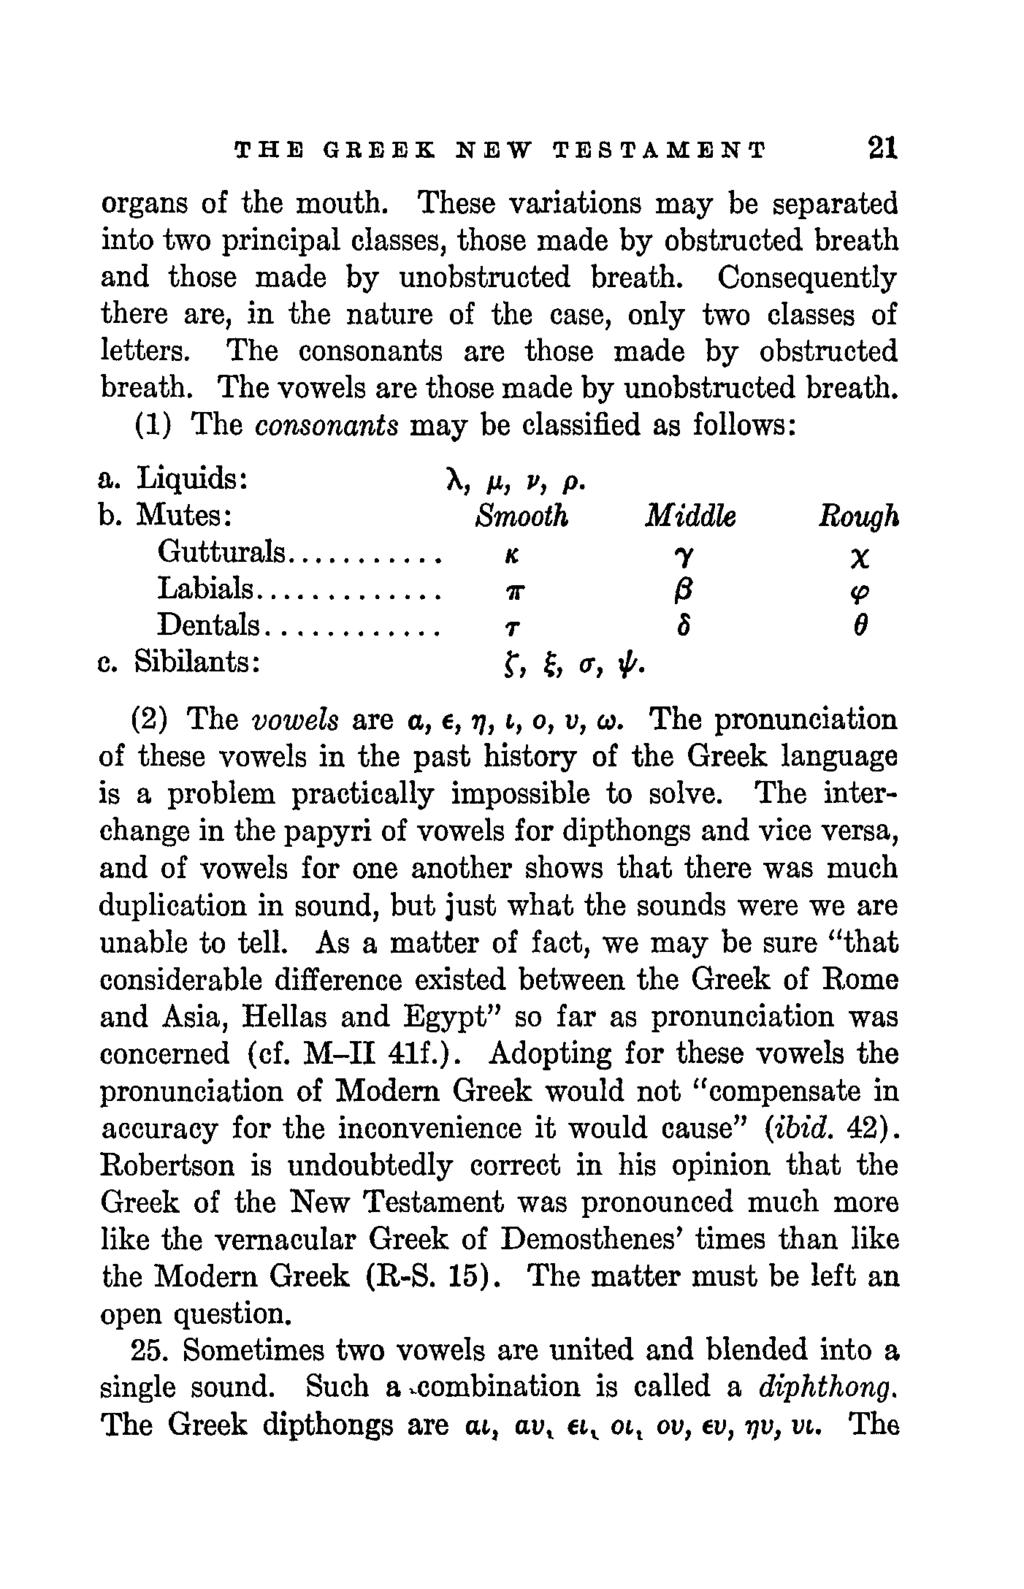 THE GREEK NEW TESTAMENT 21 organs of the mouth. These variations may be separated into two principal classes, those made by obstructed breath and those made by unobstructed breath.